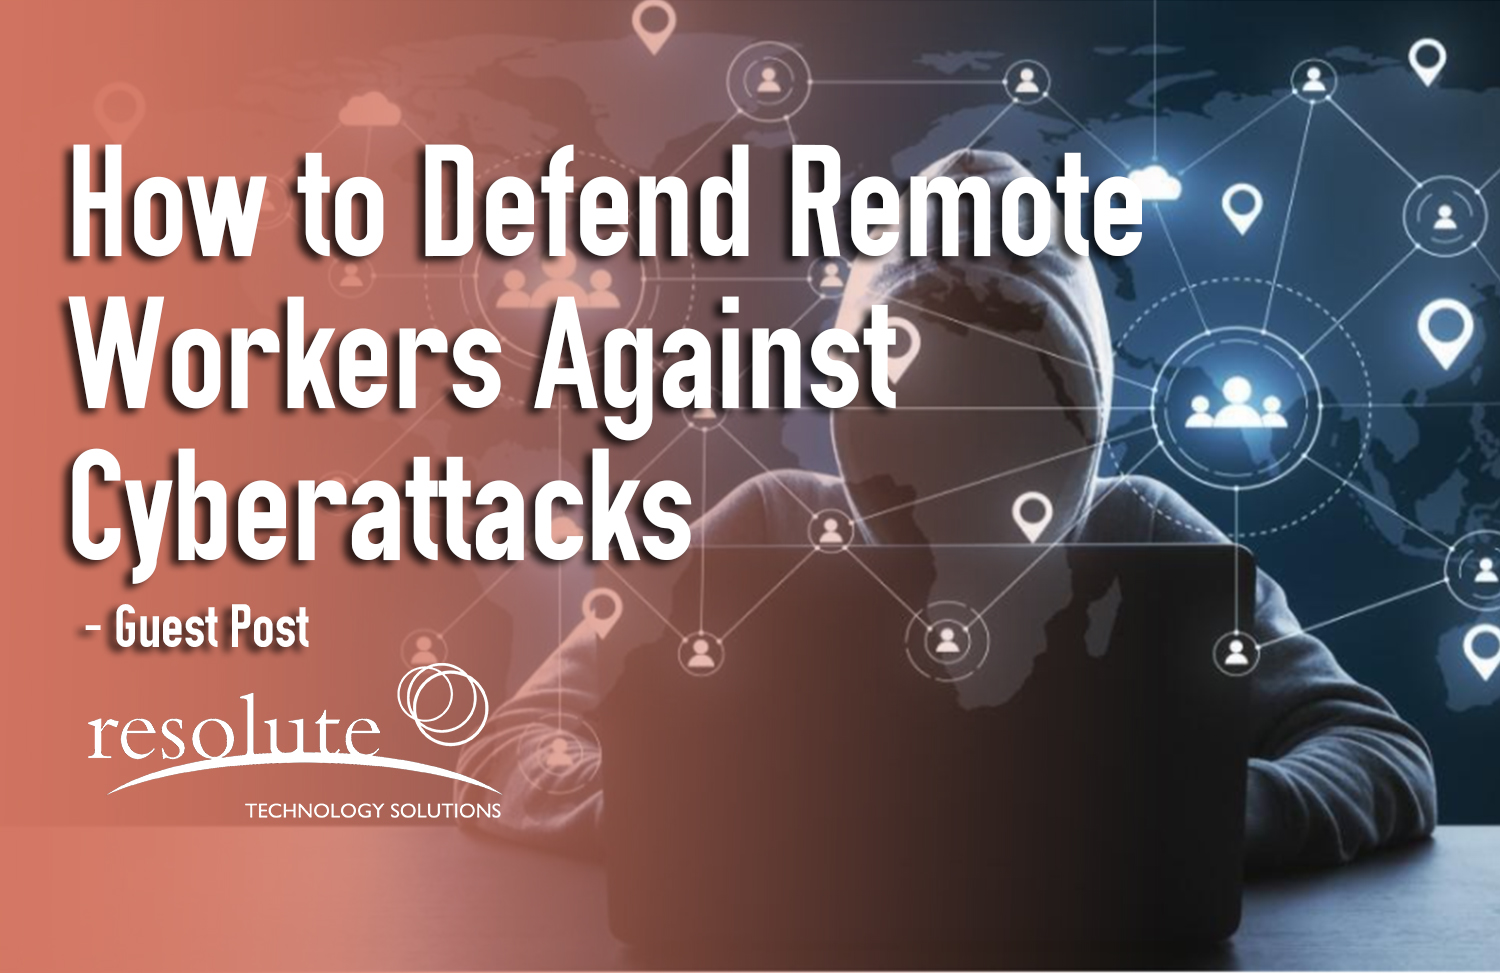 How to Defend Remote Workers Against Cyberattacks